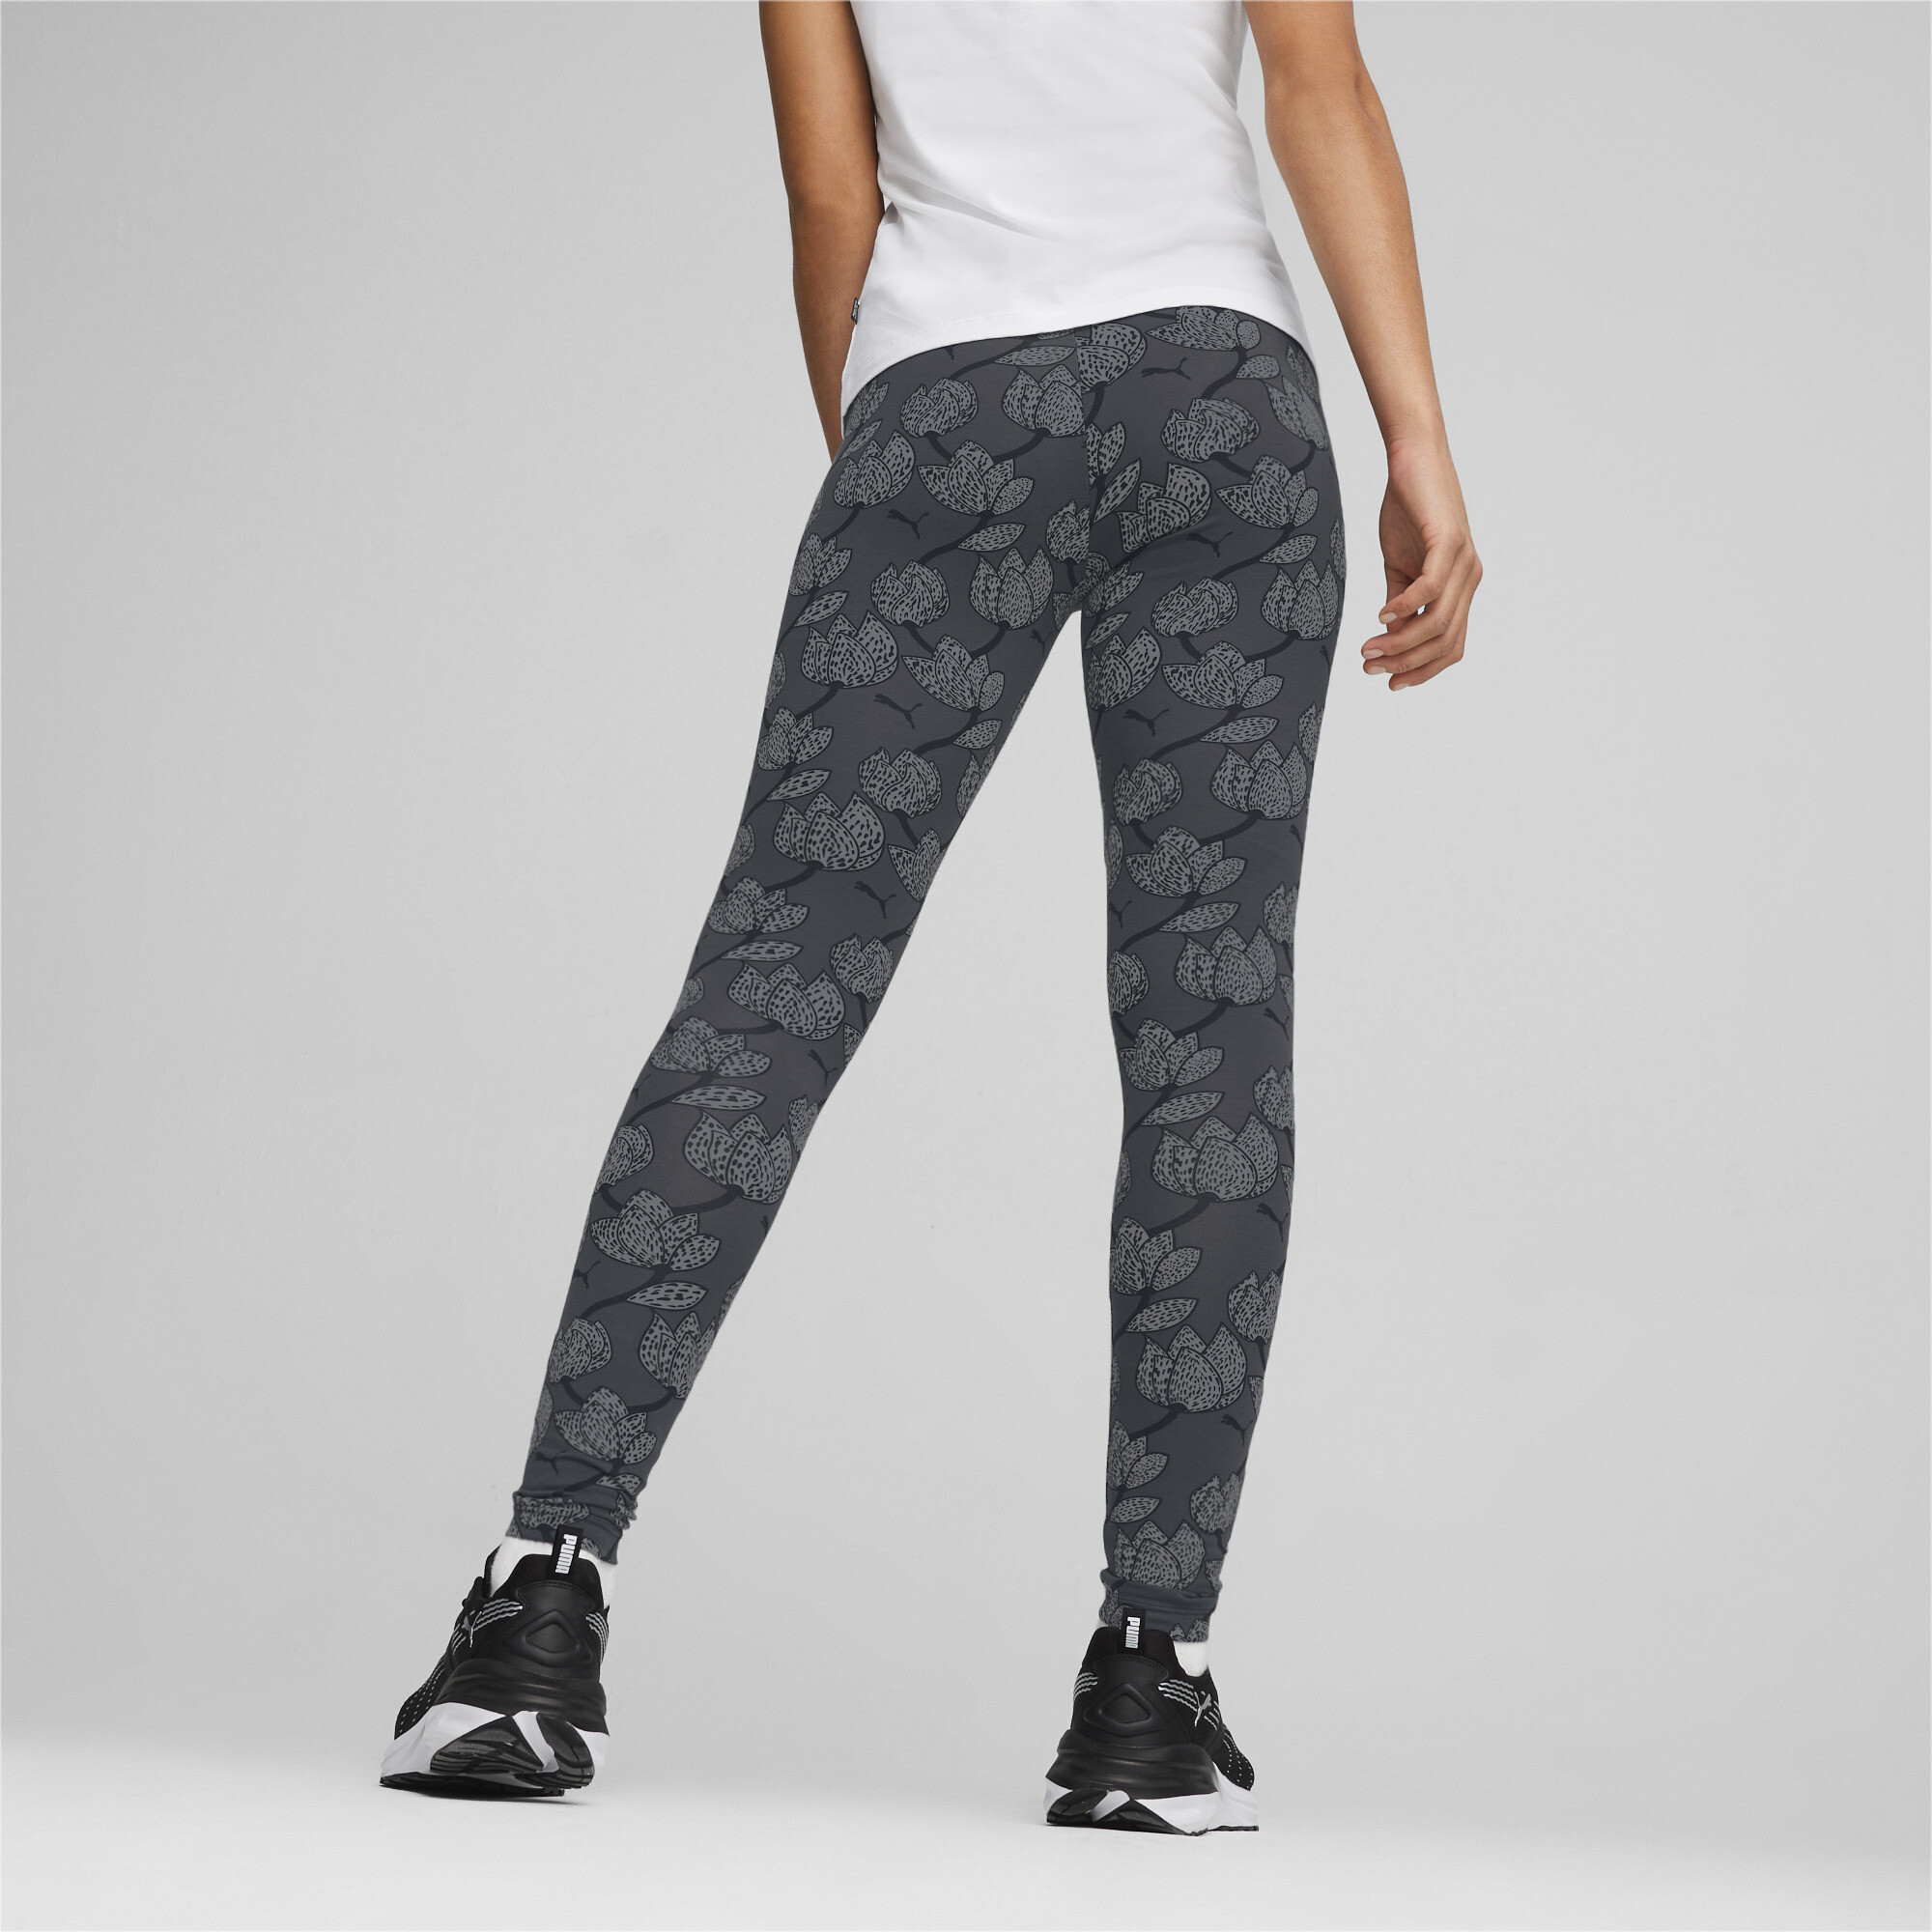 Women's PUMA ESS+ BLOSSOM All-Over Print Leggings In Black, Size Large